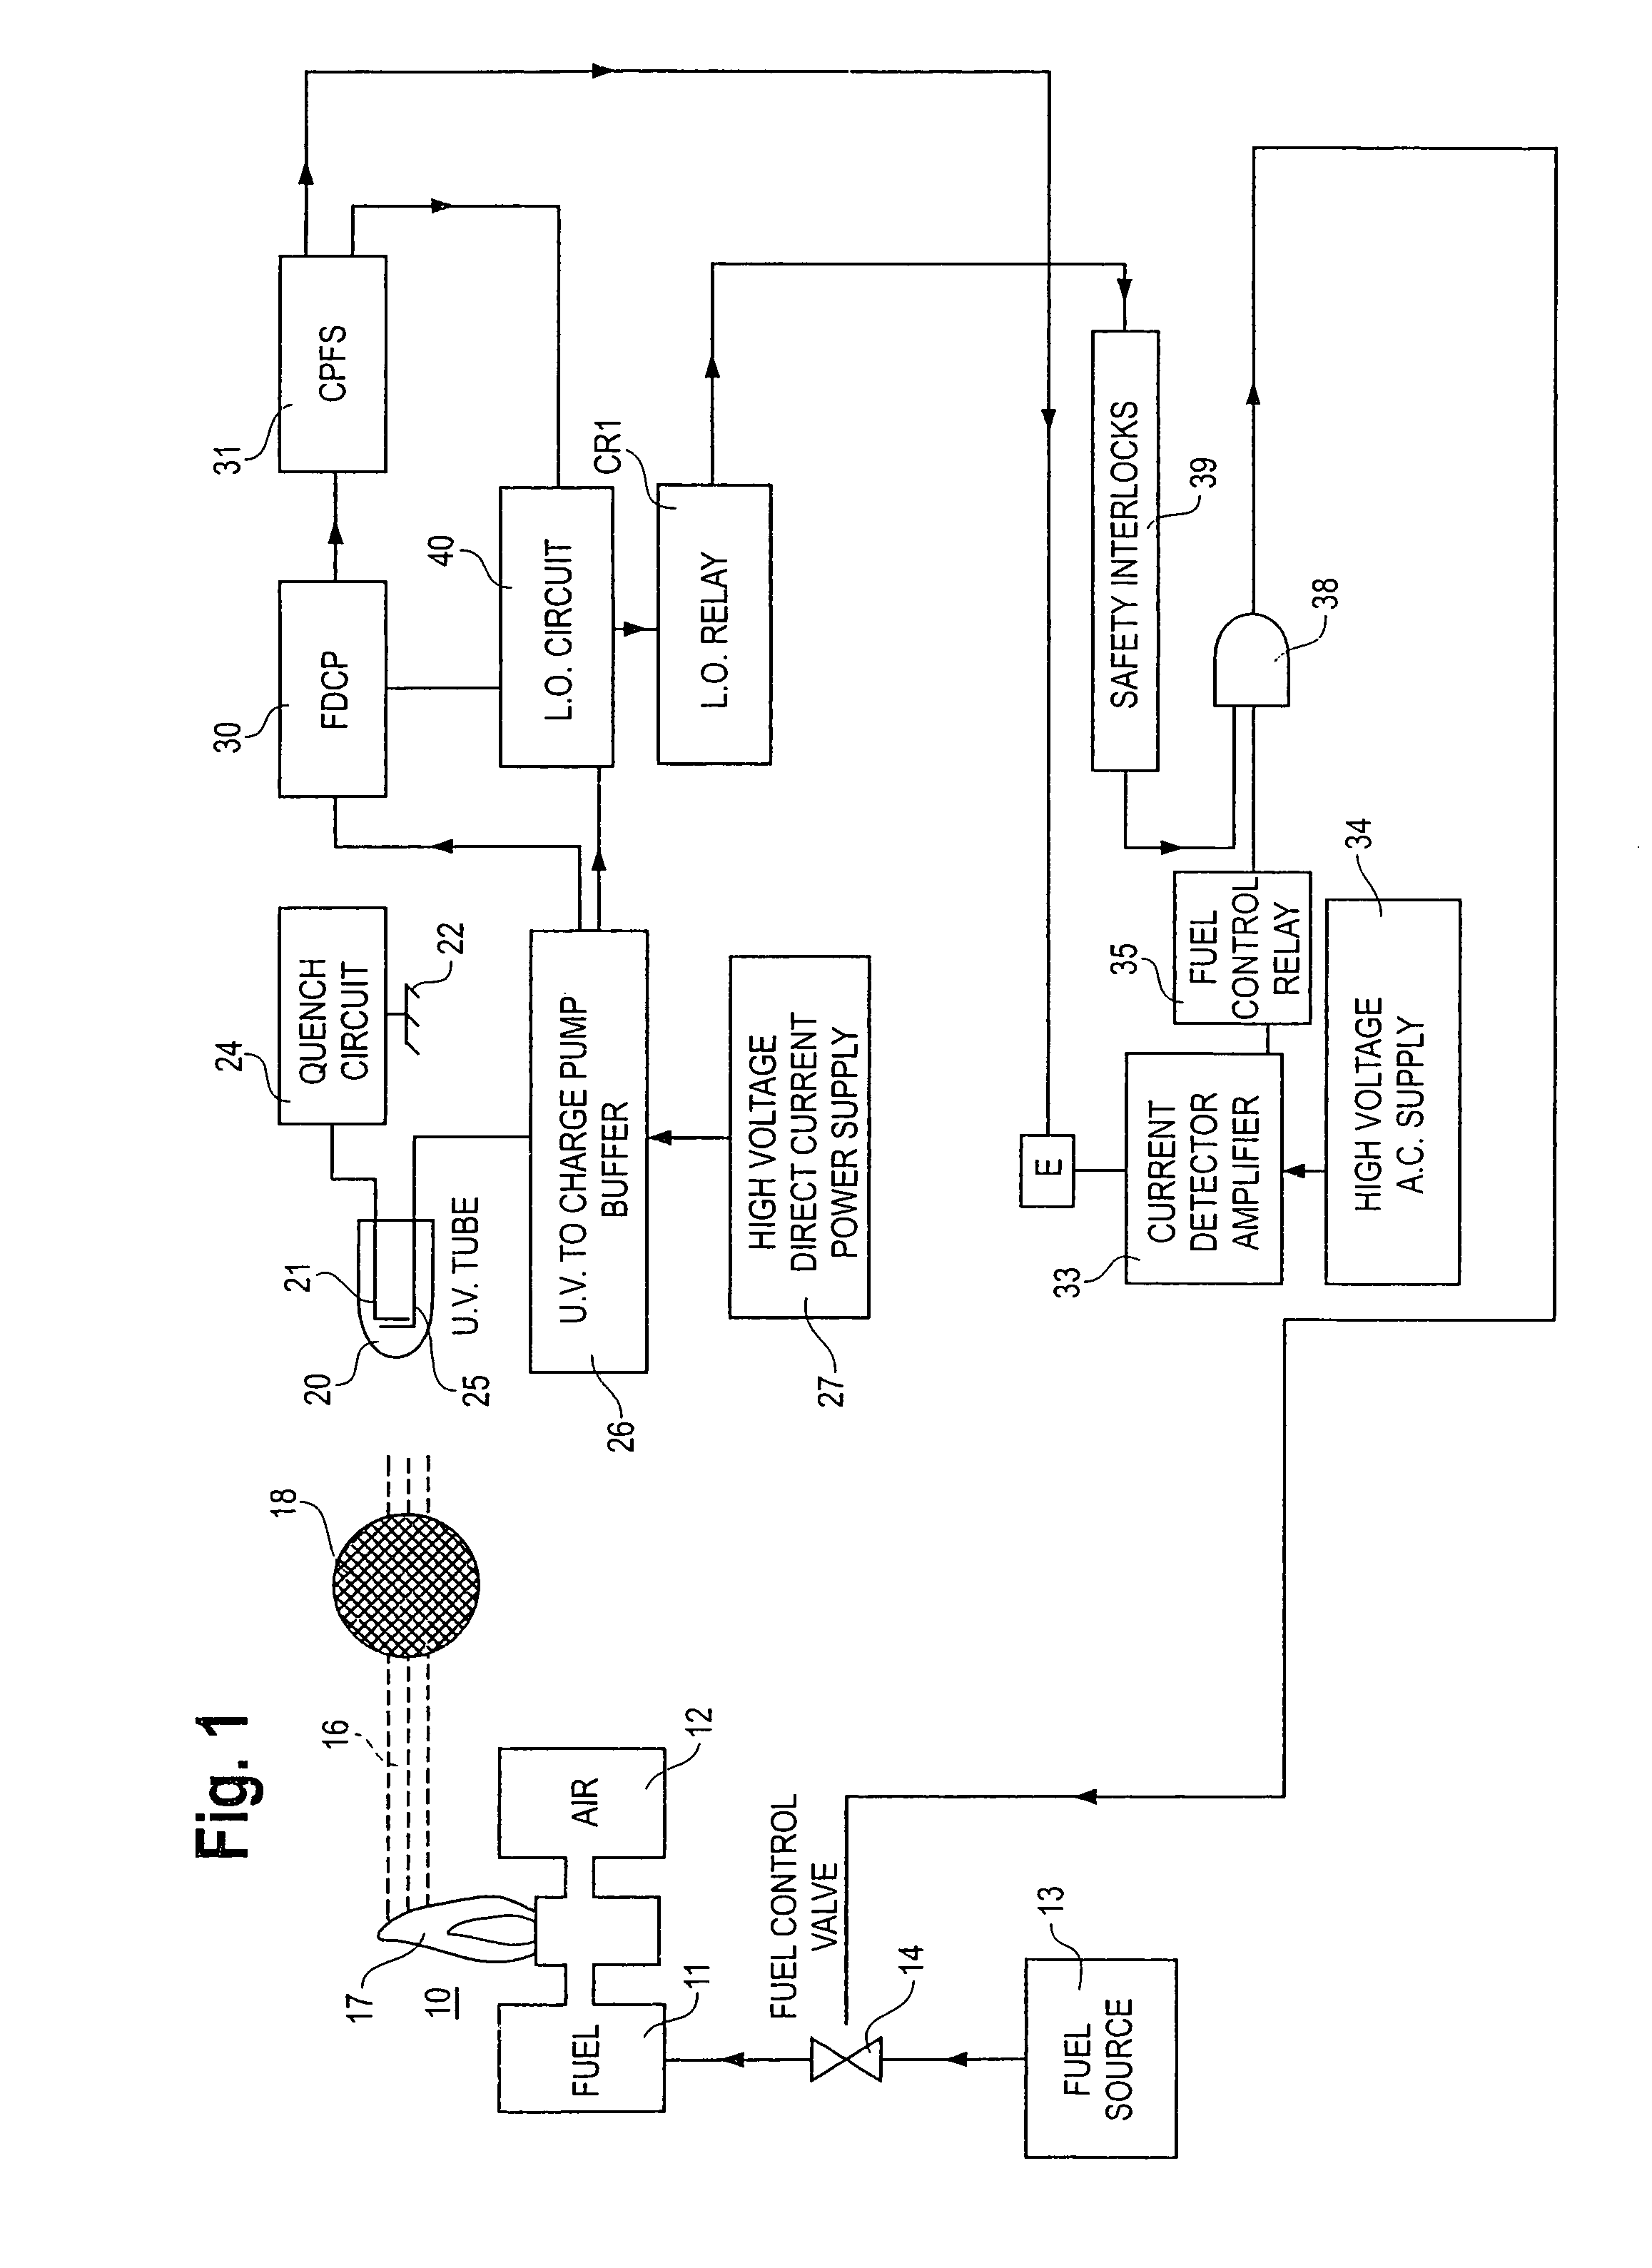 Flame detector, method and fuel valve control